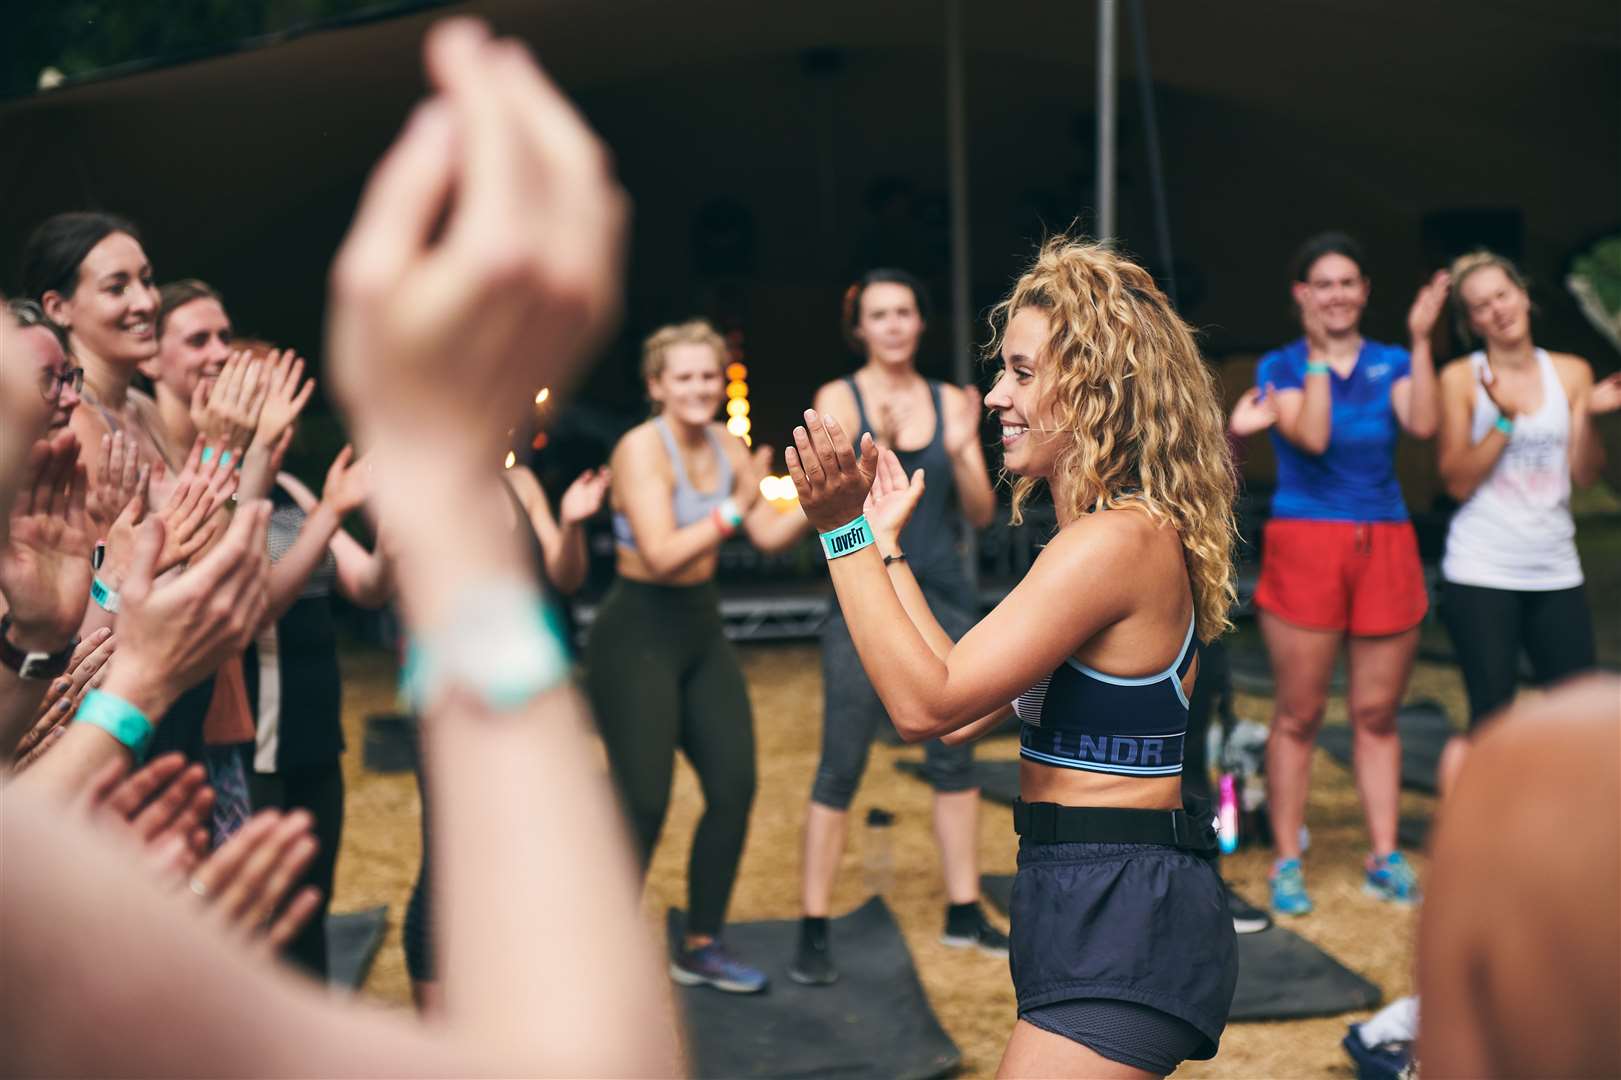 LoveFit Festival is coming to St Clere Estate in Sevenoaks for a weekend of exercise and wellbeing. Picture: LoveFit